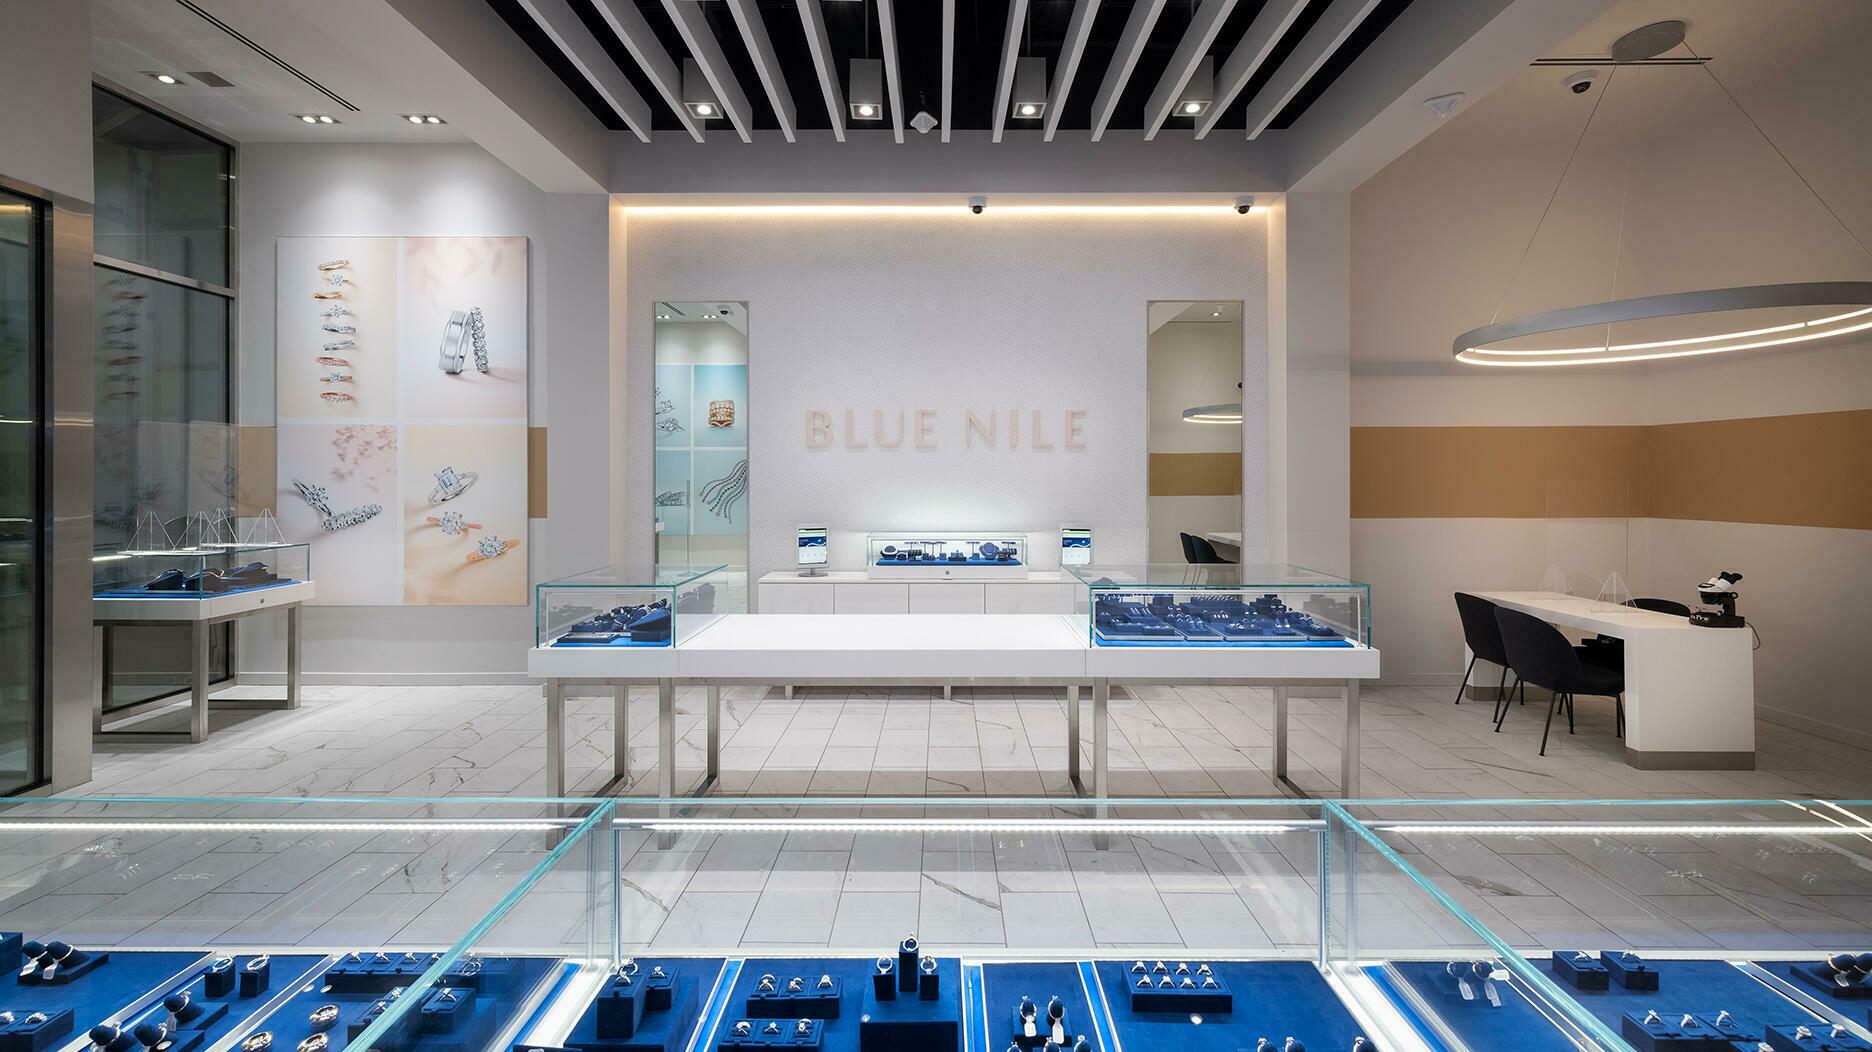 Signet Seals the Deal on Blue Nile Acquisition